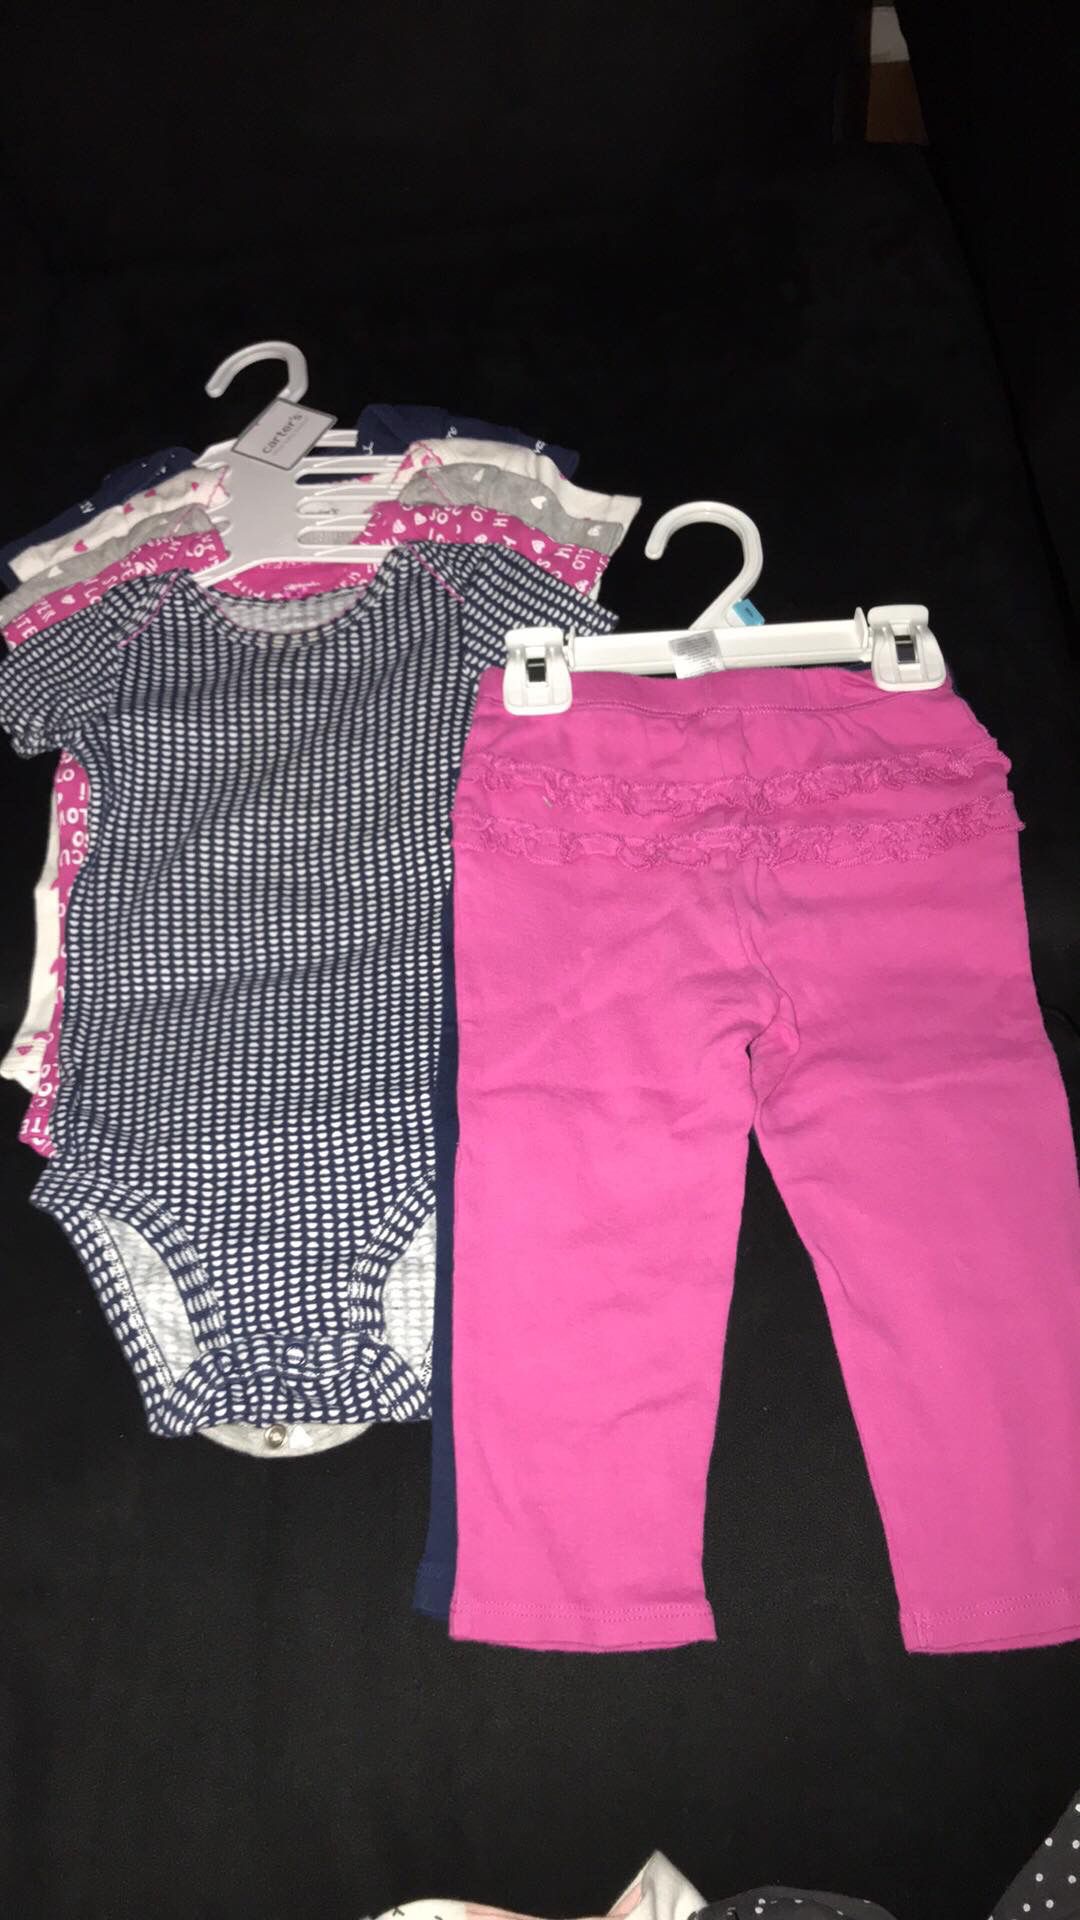 Baby girl carter’s bodysuits with pants size 18 months